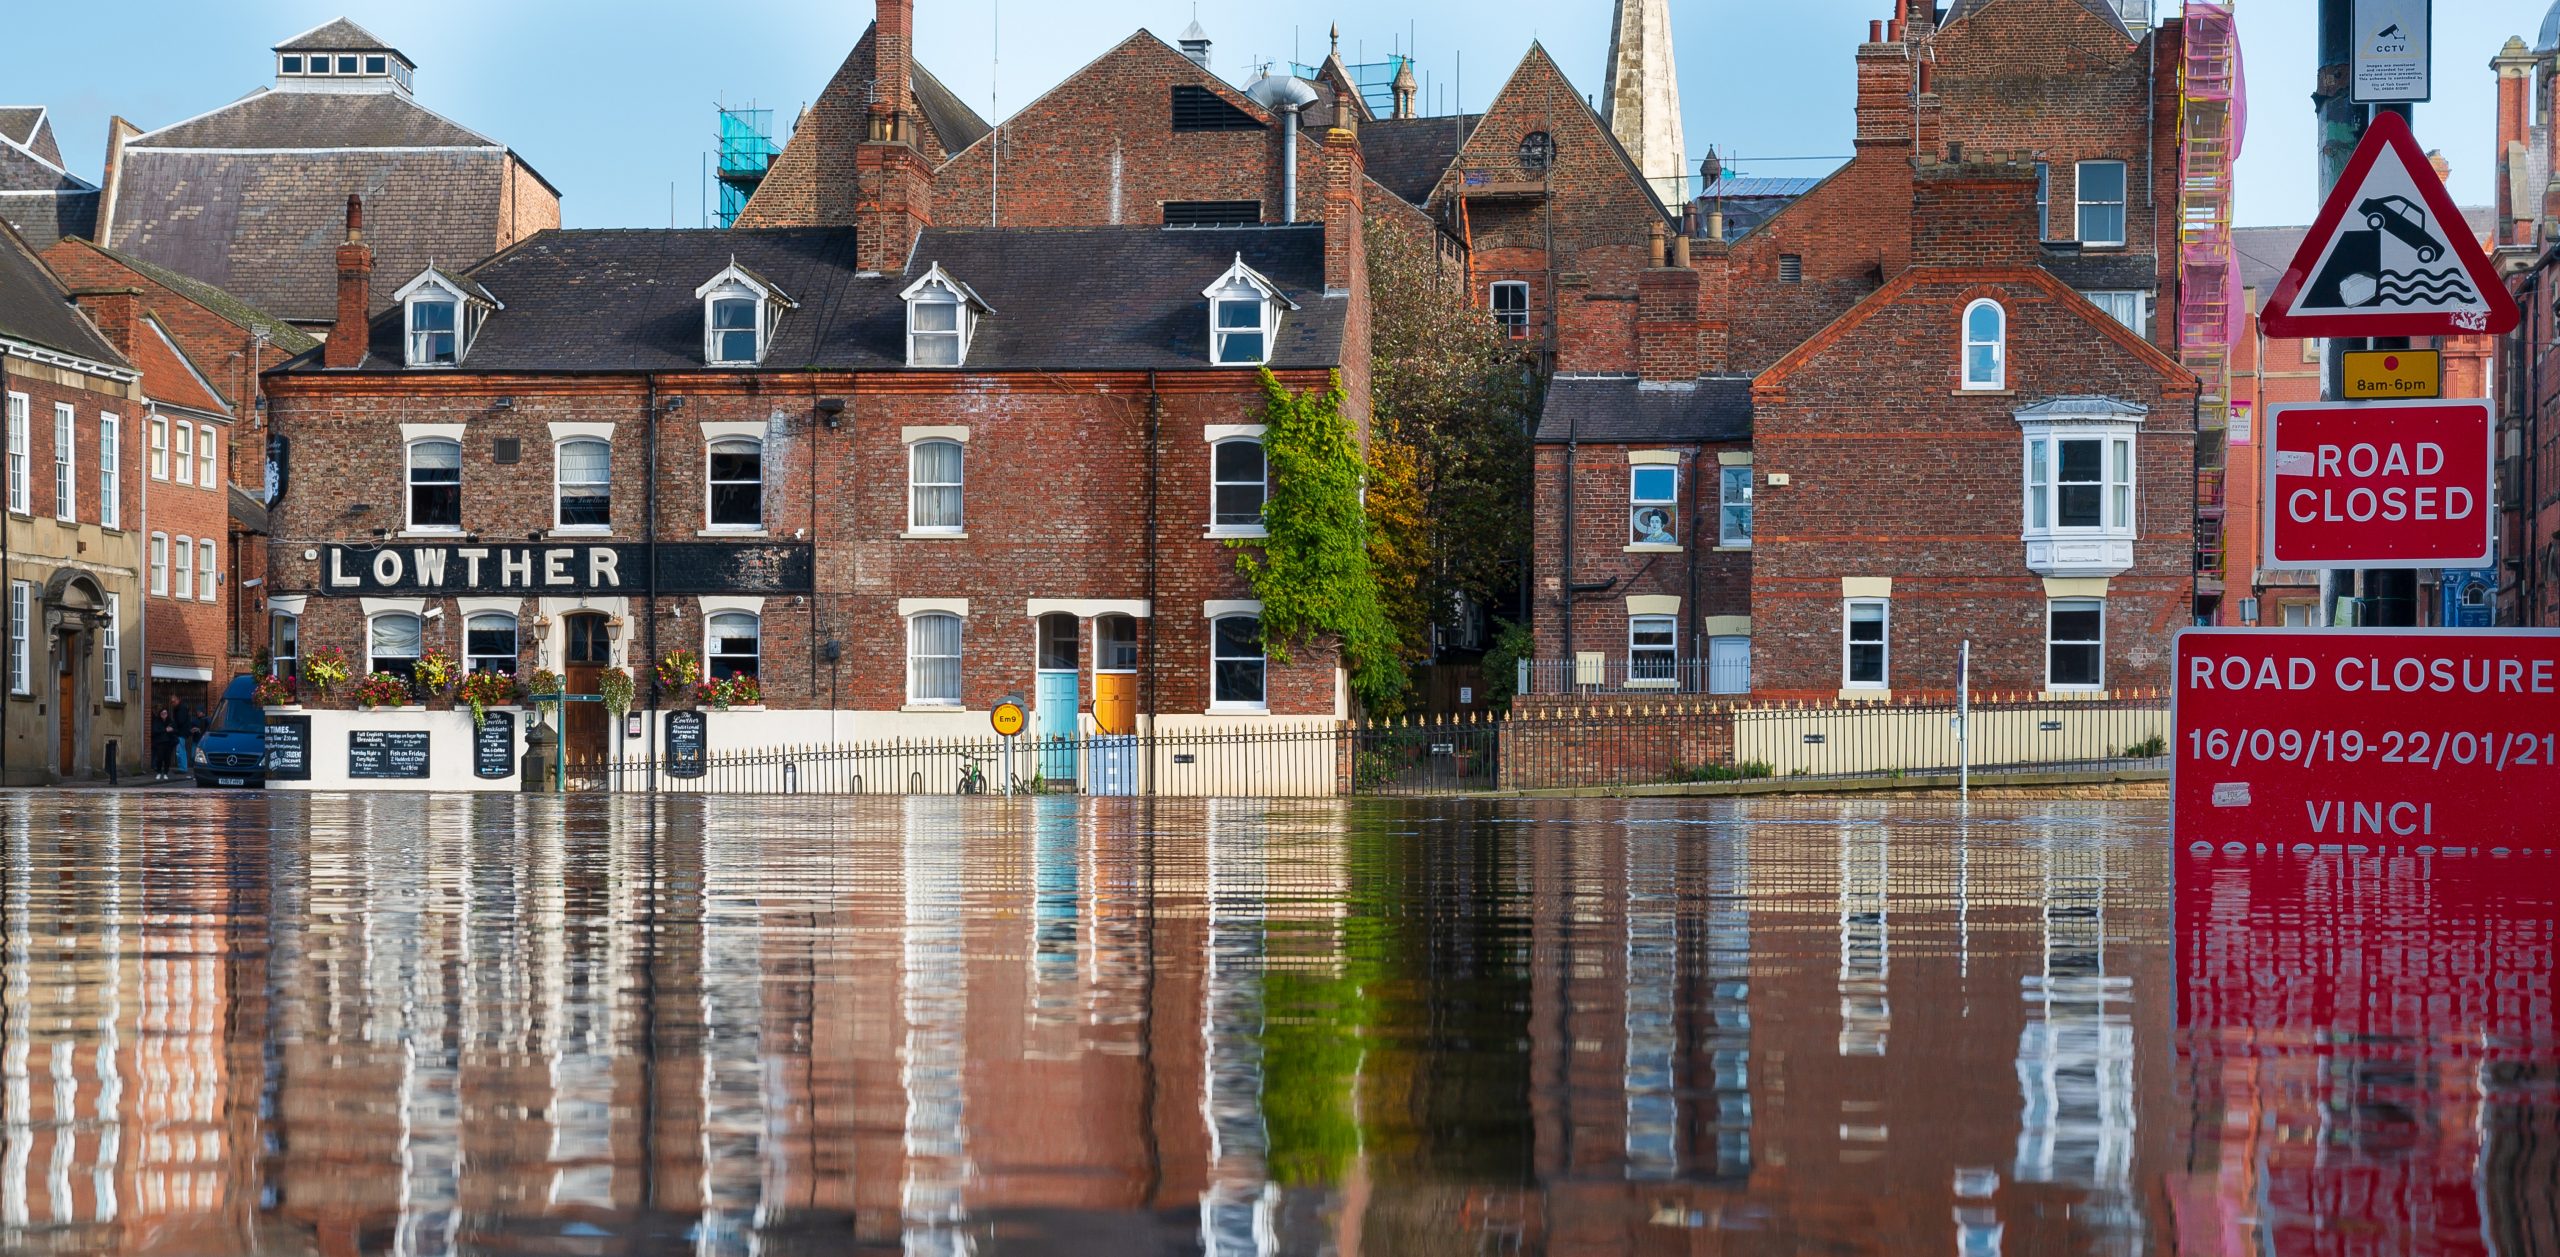 The climate is changing: are you prepared? @LandmarkUK